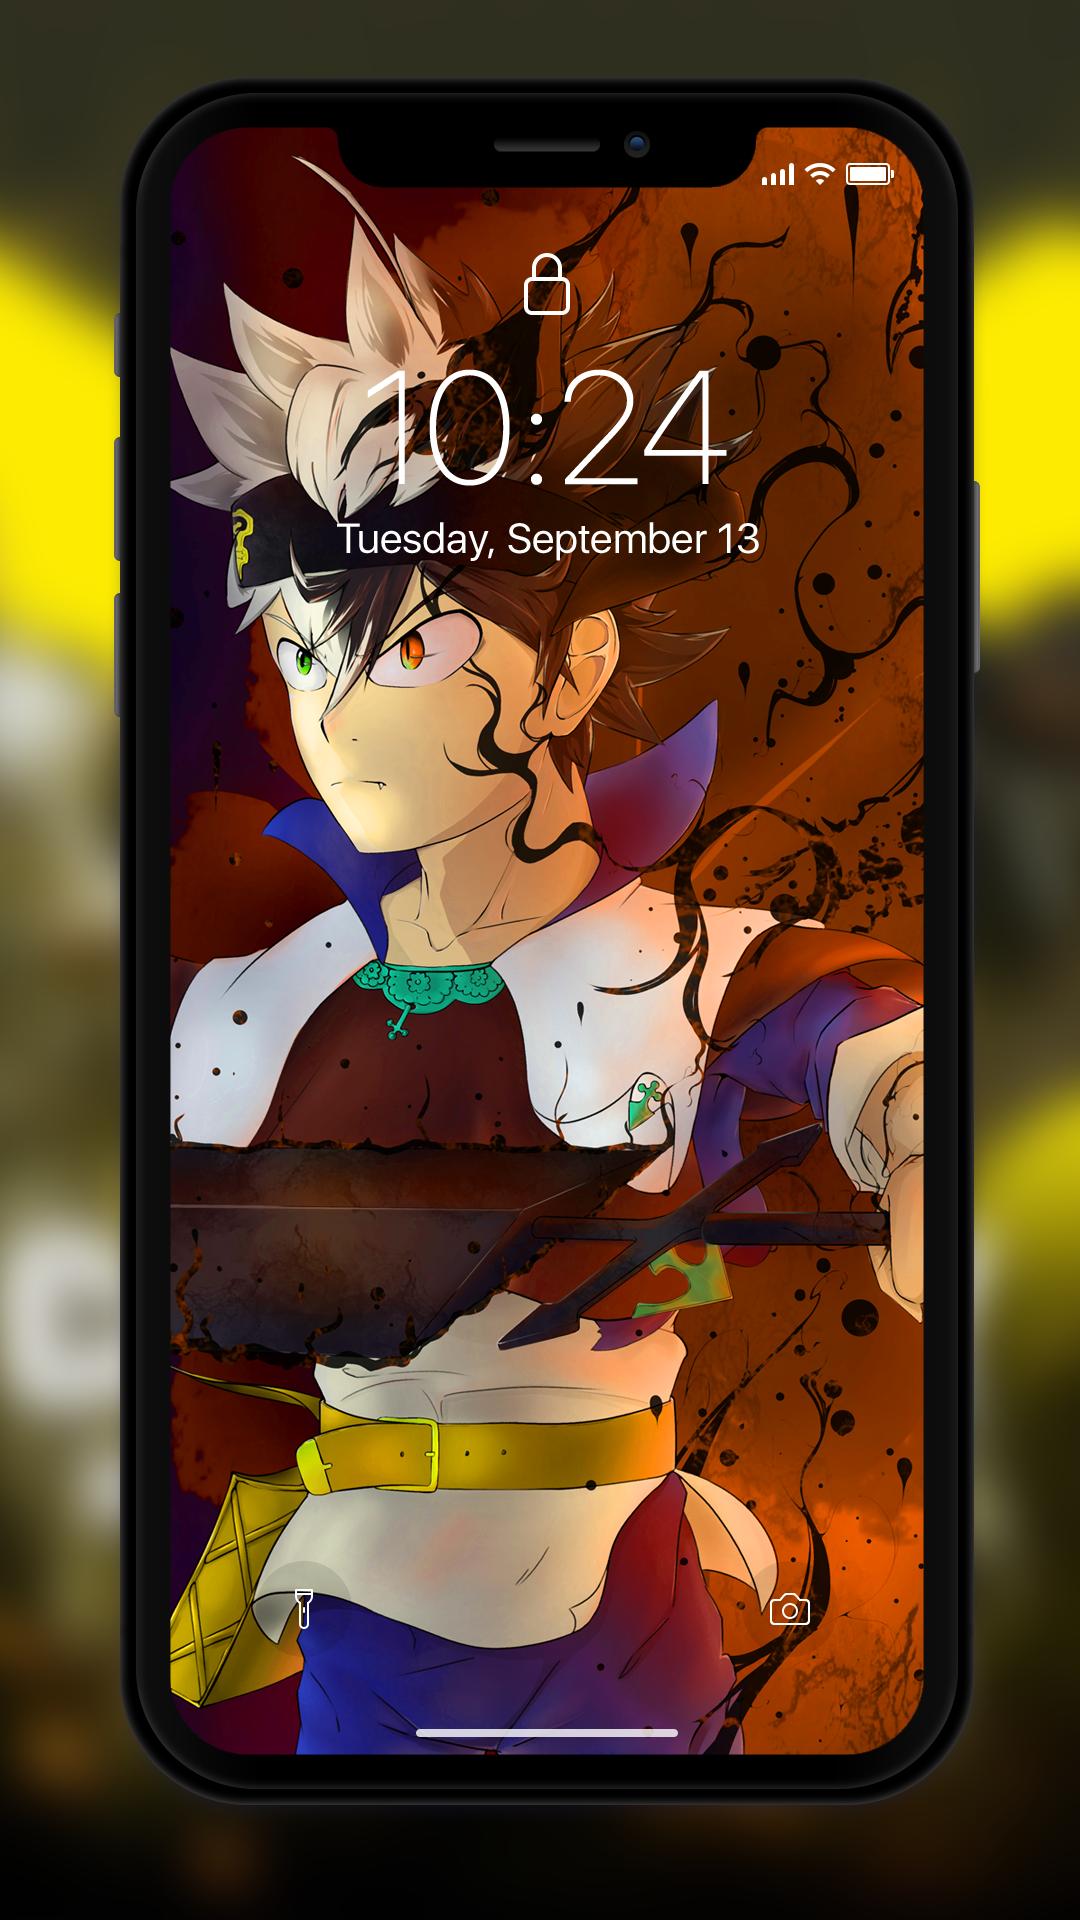 New Black Anime C HD Wallpapers 2020 for Android - APK ...